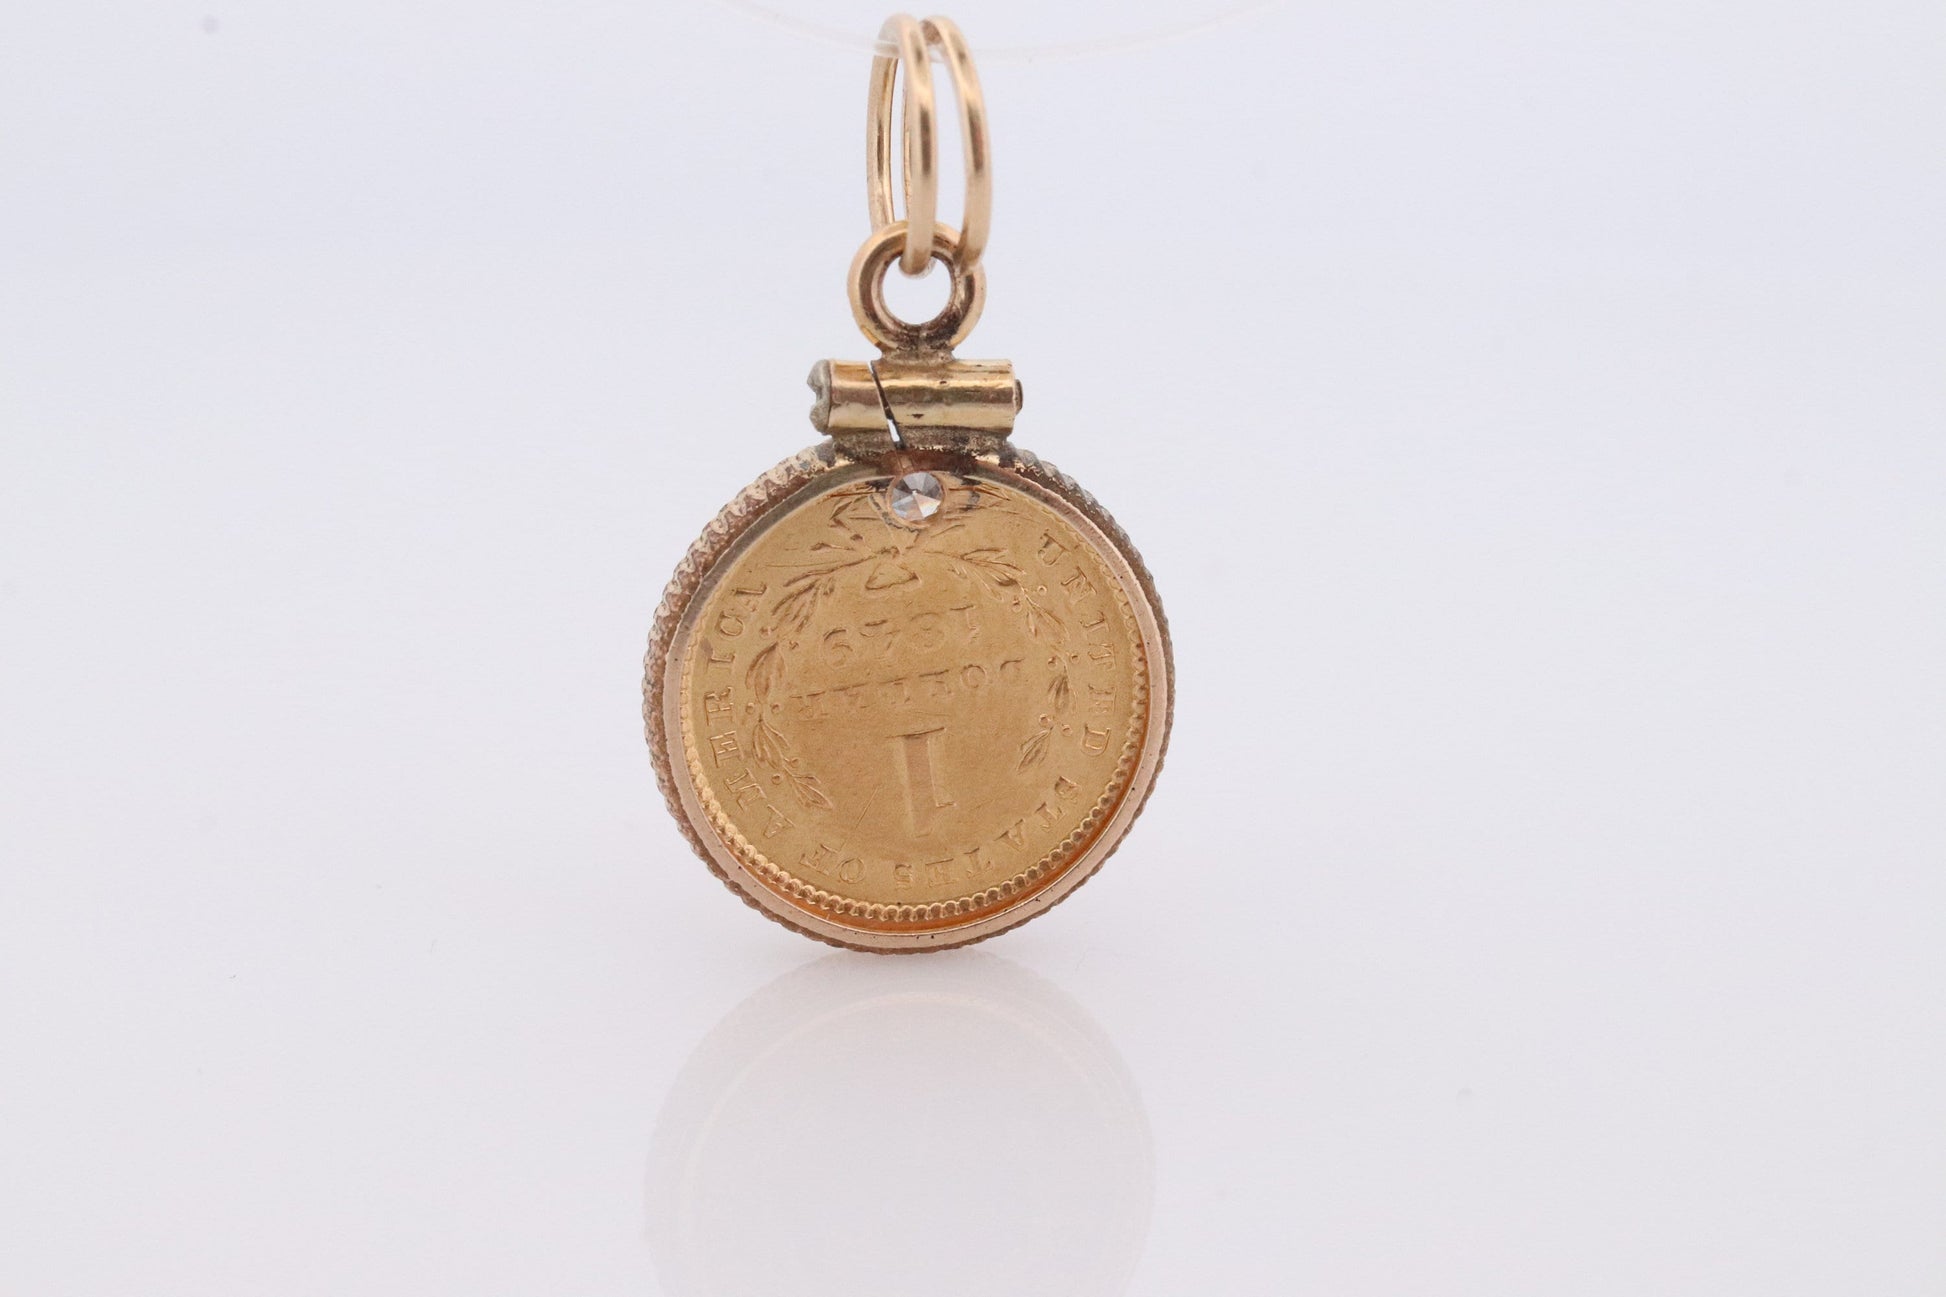 1849 US 1 dollar Liberty Head 900 gold 22K (21.6K) Gold coin set in a 14k yellow gold pendant or charm with a diamond.